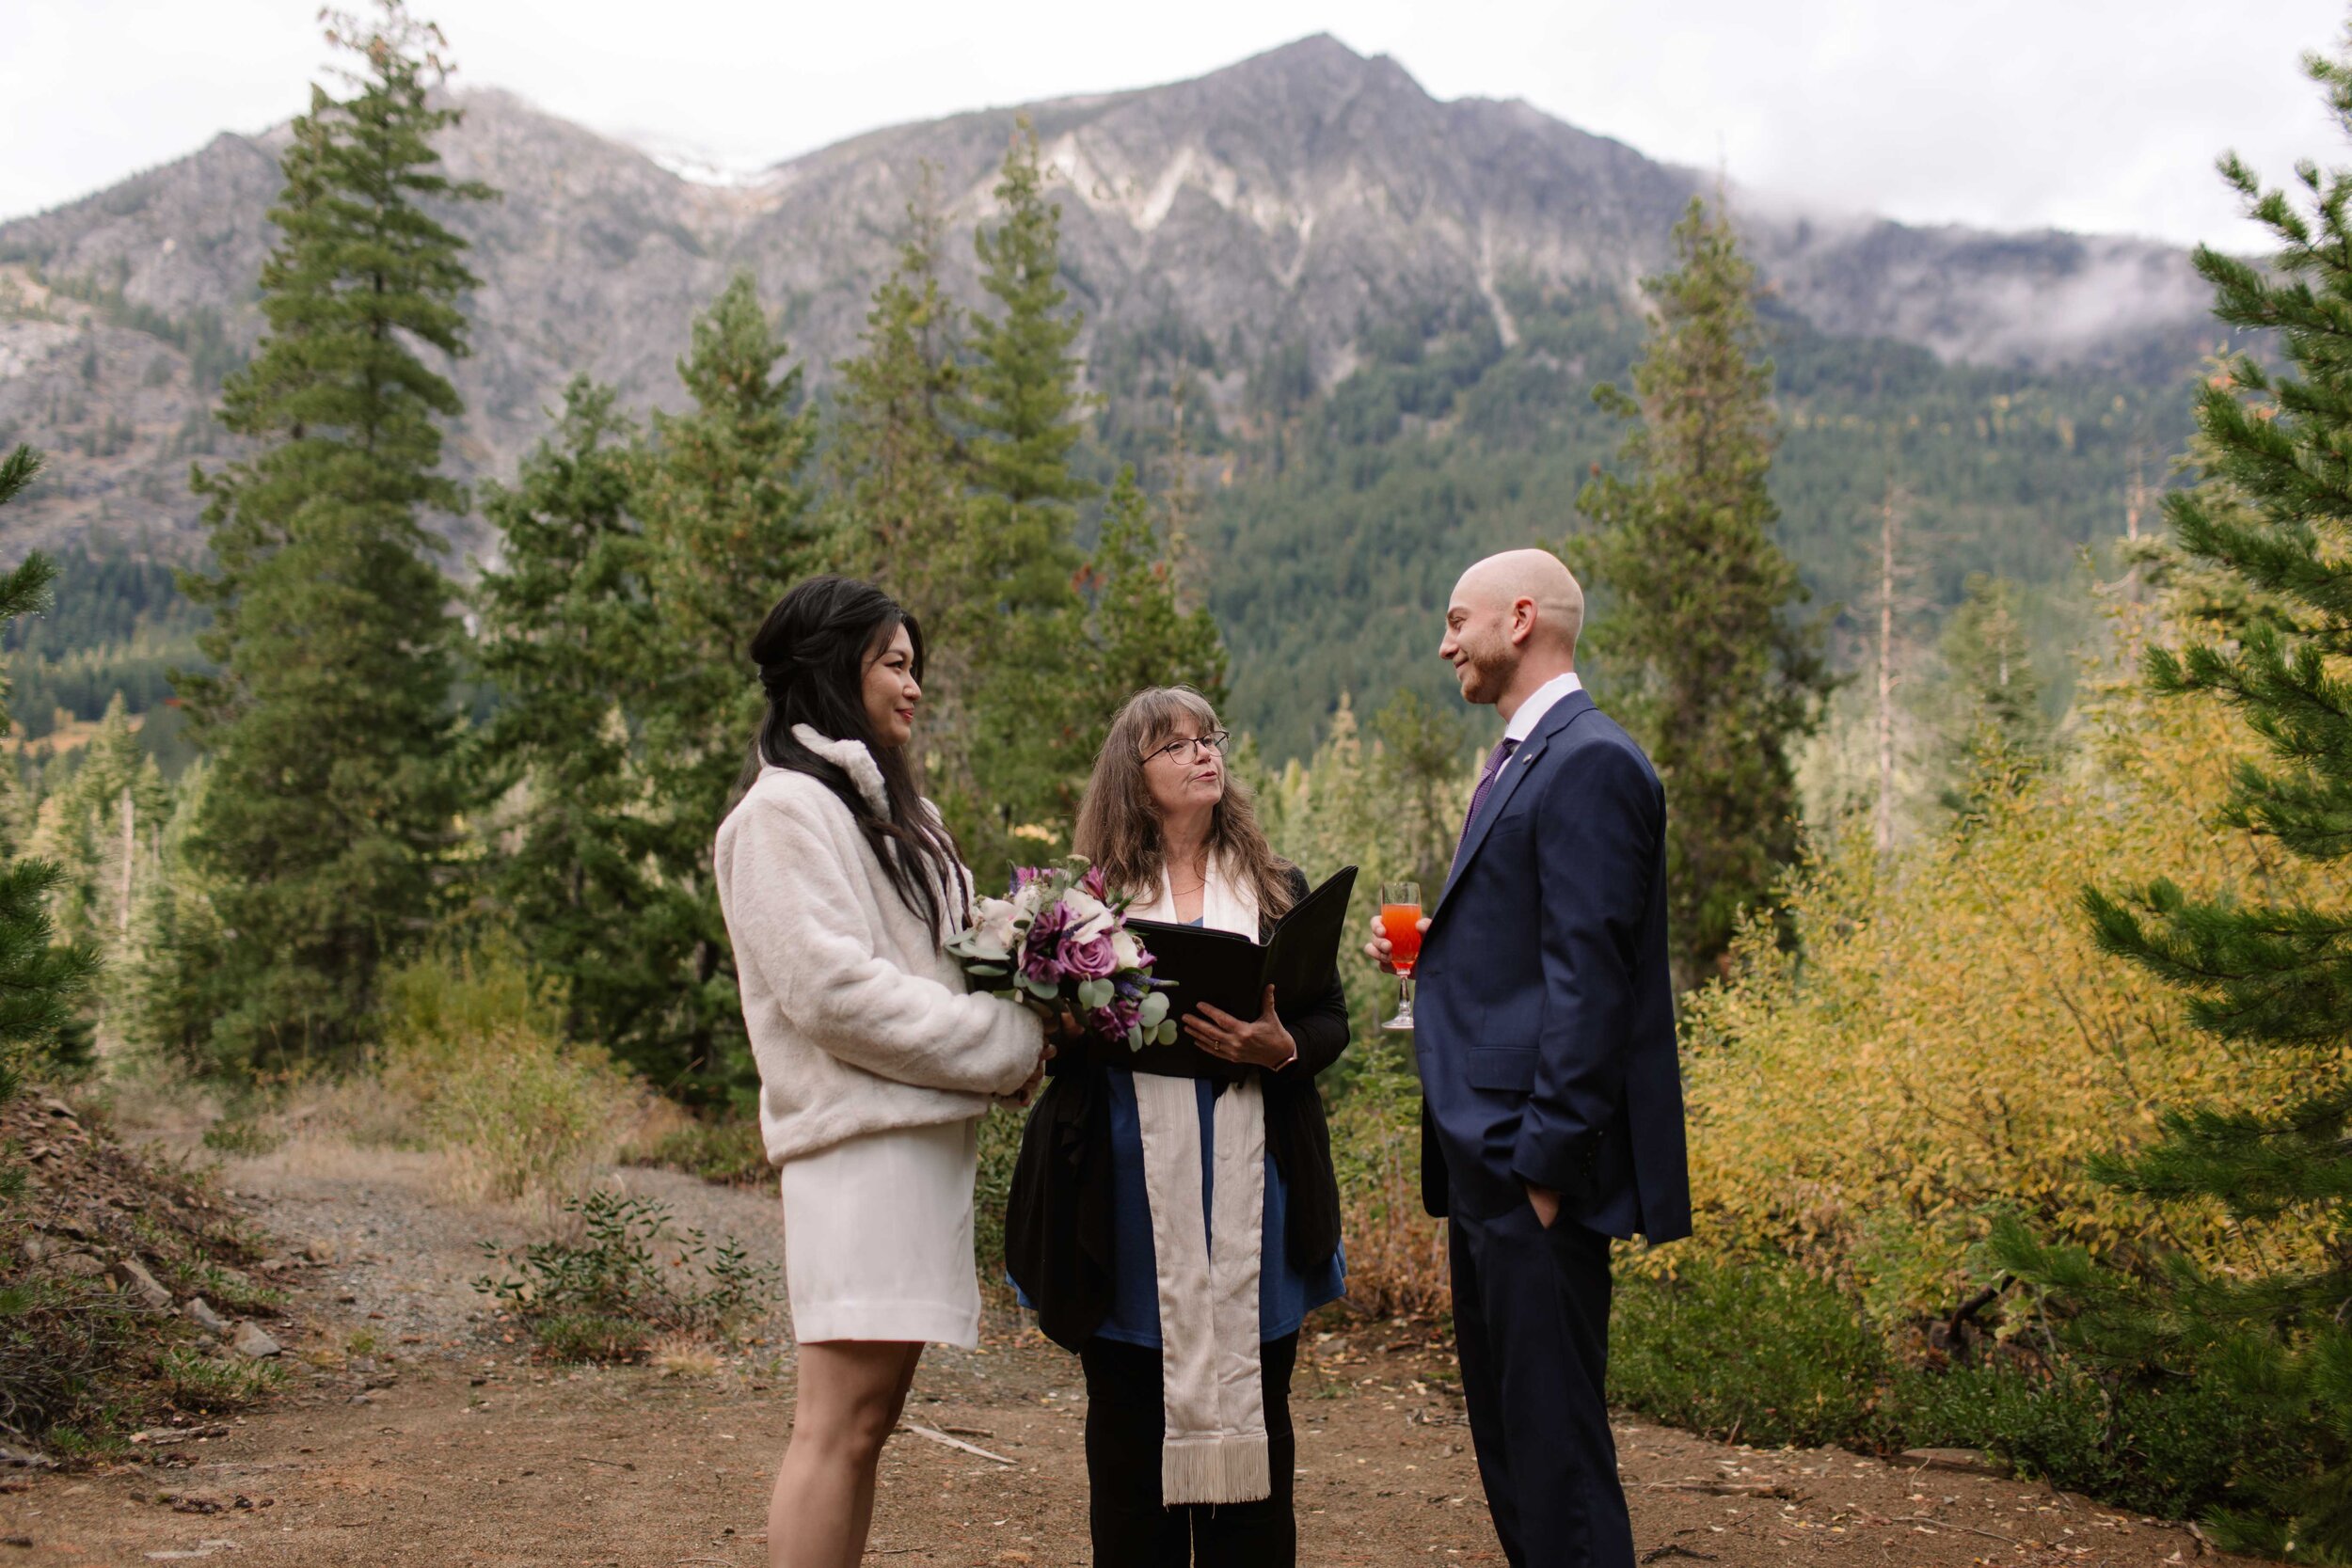 socal-san-diego-southern-california-elopement-small-wedding-outdoor-forest-mountains-waterfall-ceremony-leavenworth-washington-photographer-16.jpg